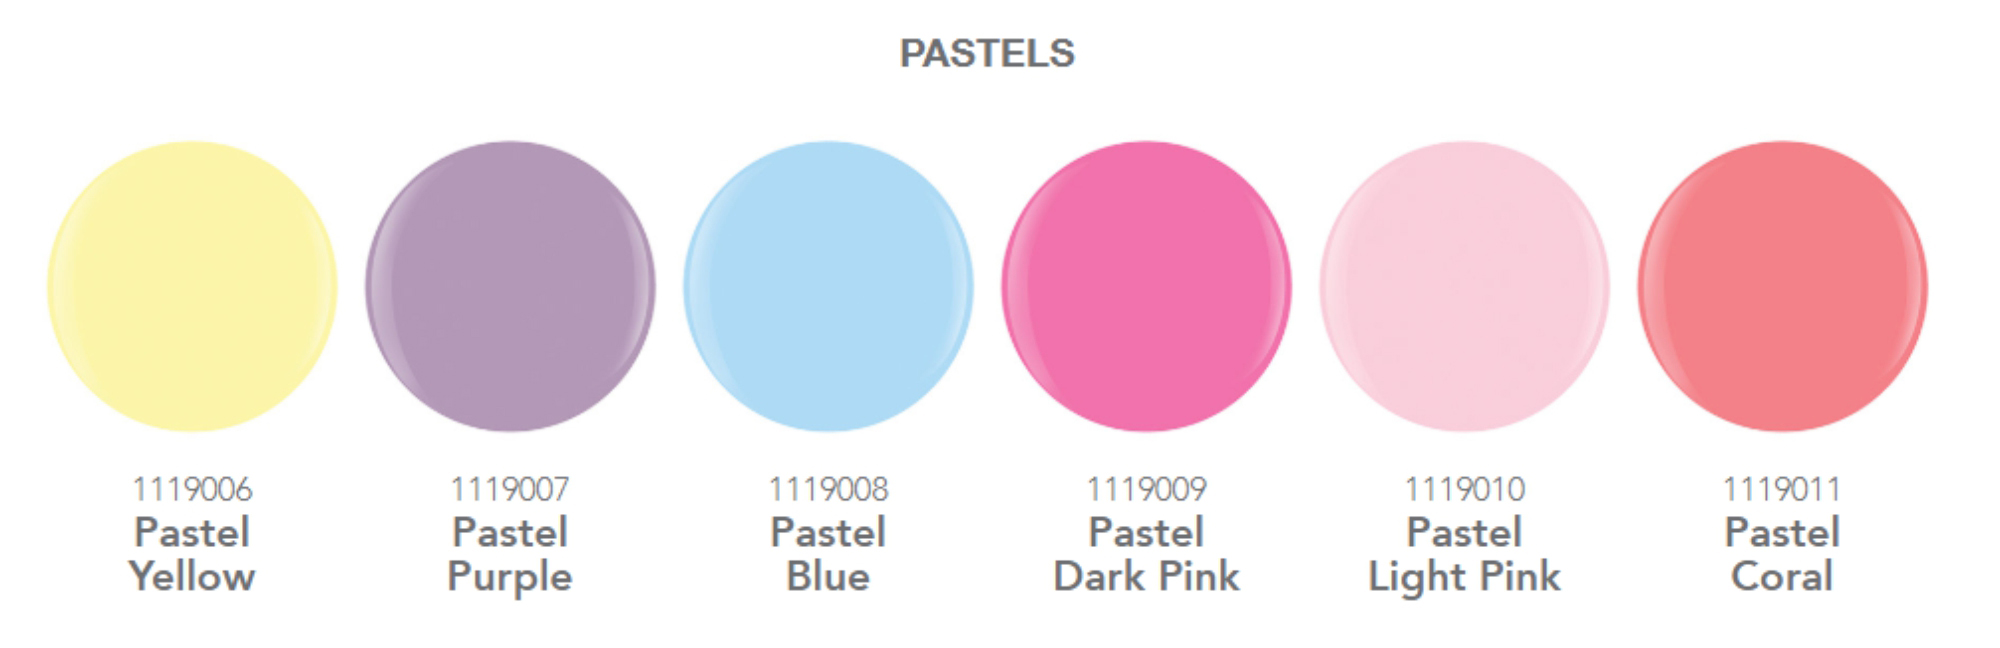 Pastels swatches